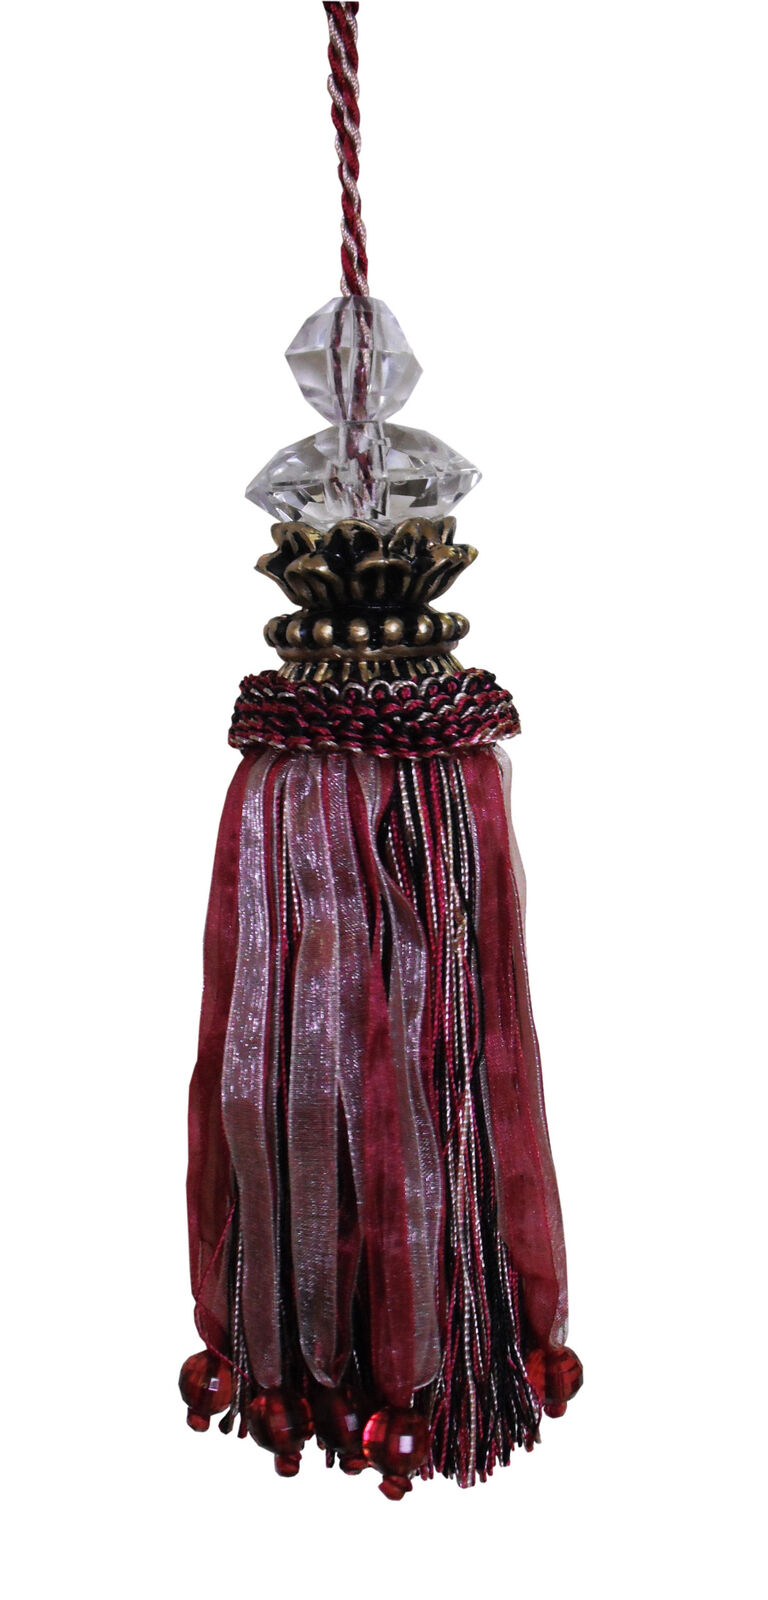 Large Tassel with Gold Top and Faceted Beads - Burgundy and Gold - Decorative Tassel for Antique Key or Door BBGT01